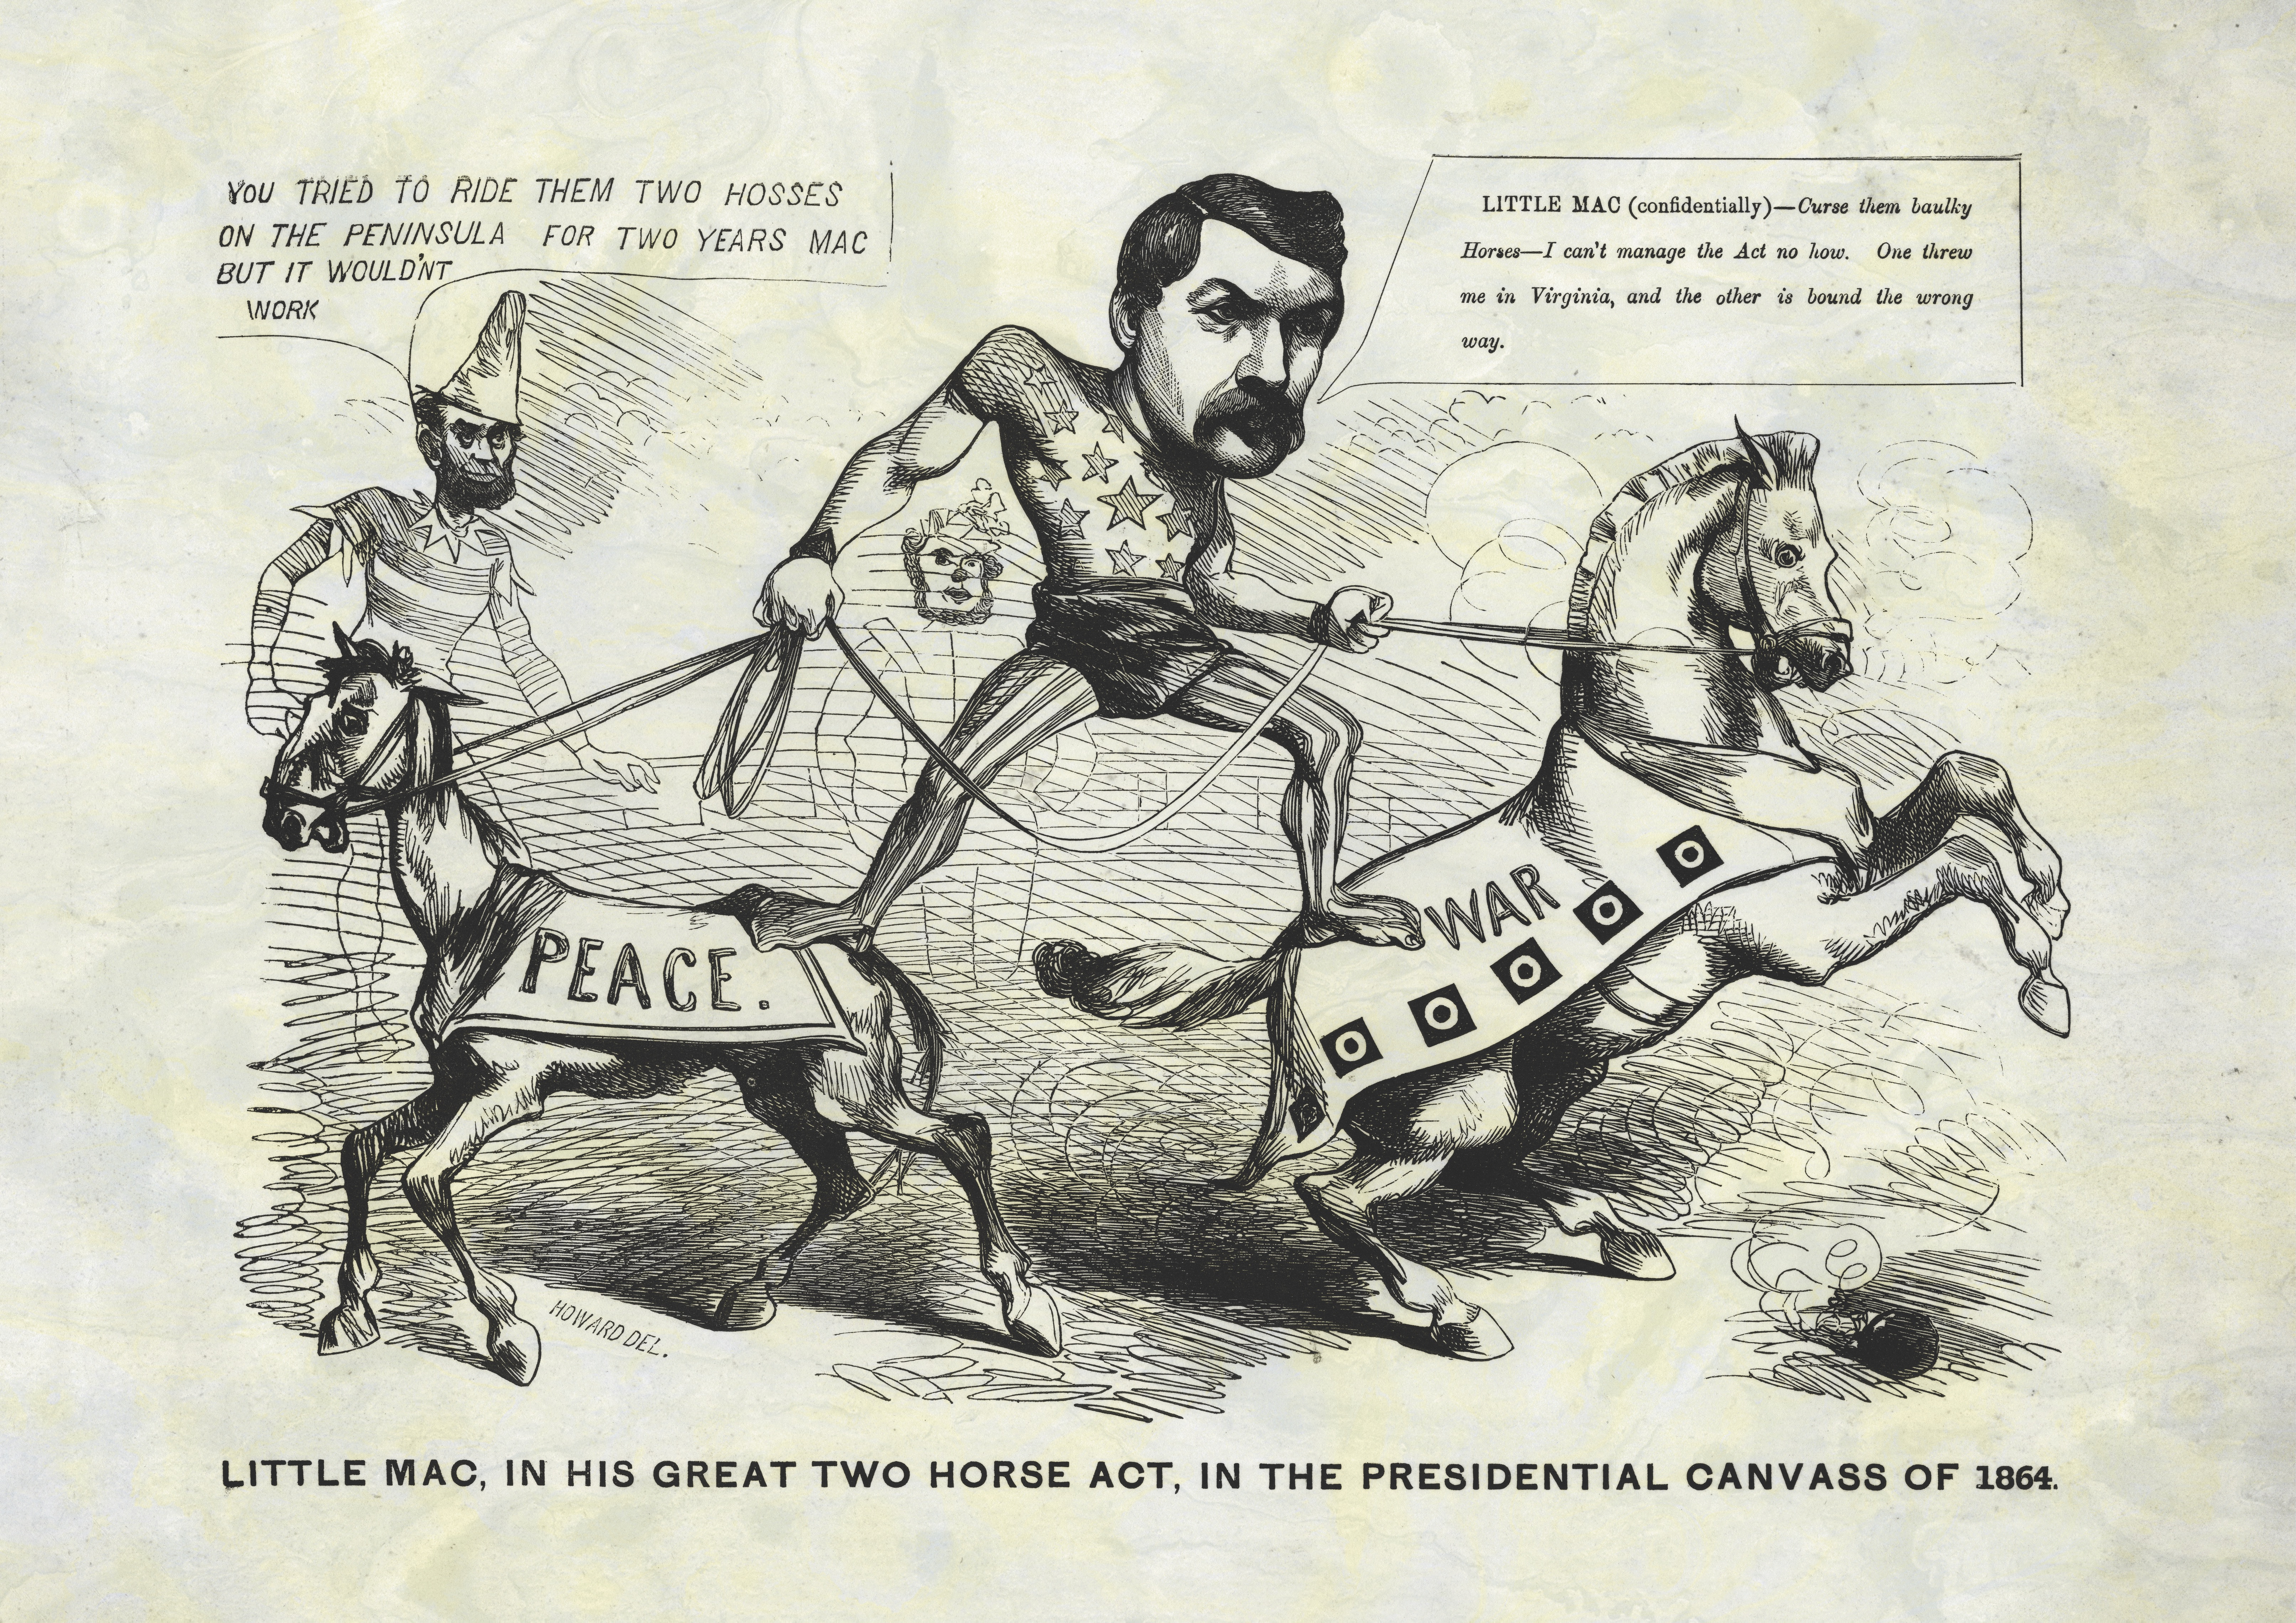 McClellan found himself the subject of scorn in several cartoons leading up to the election for his apparent war and peace duplicity. (Bridgeman Images)